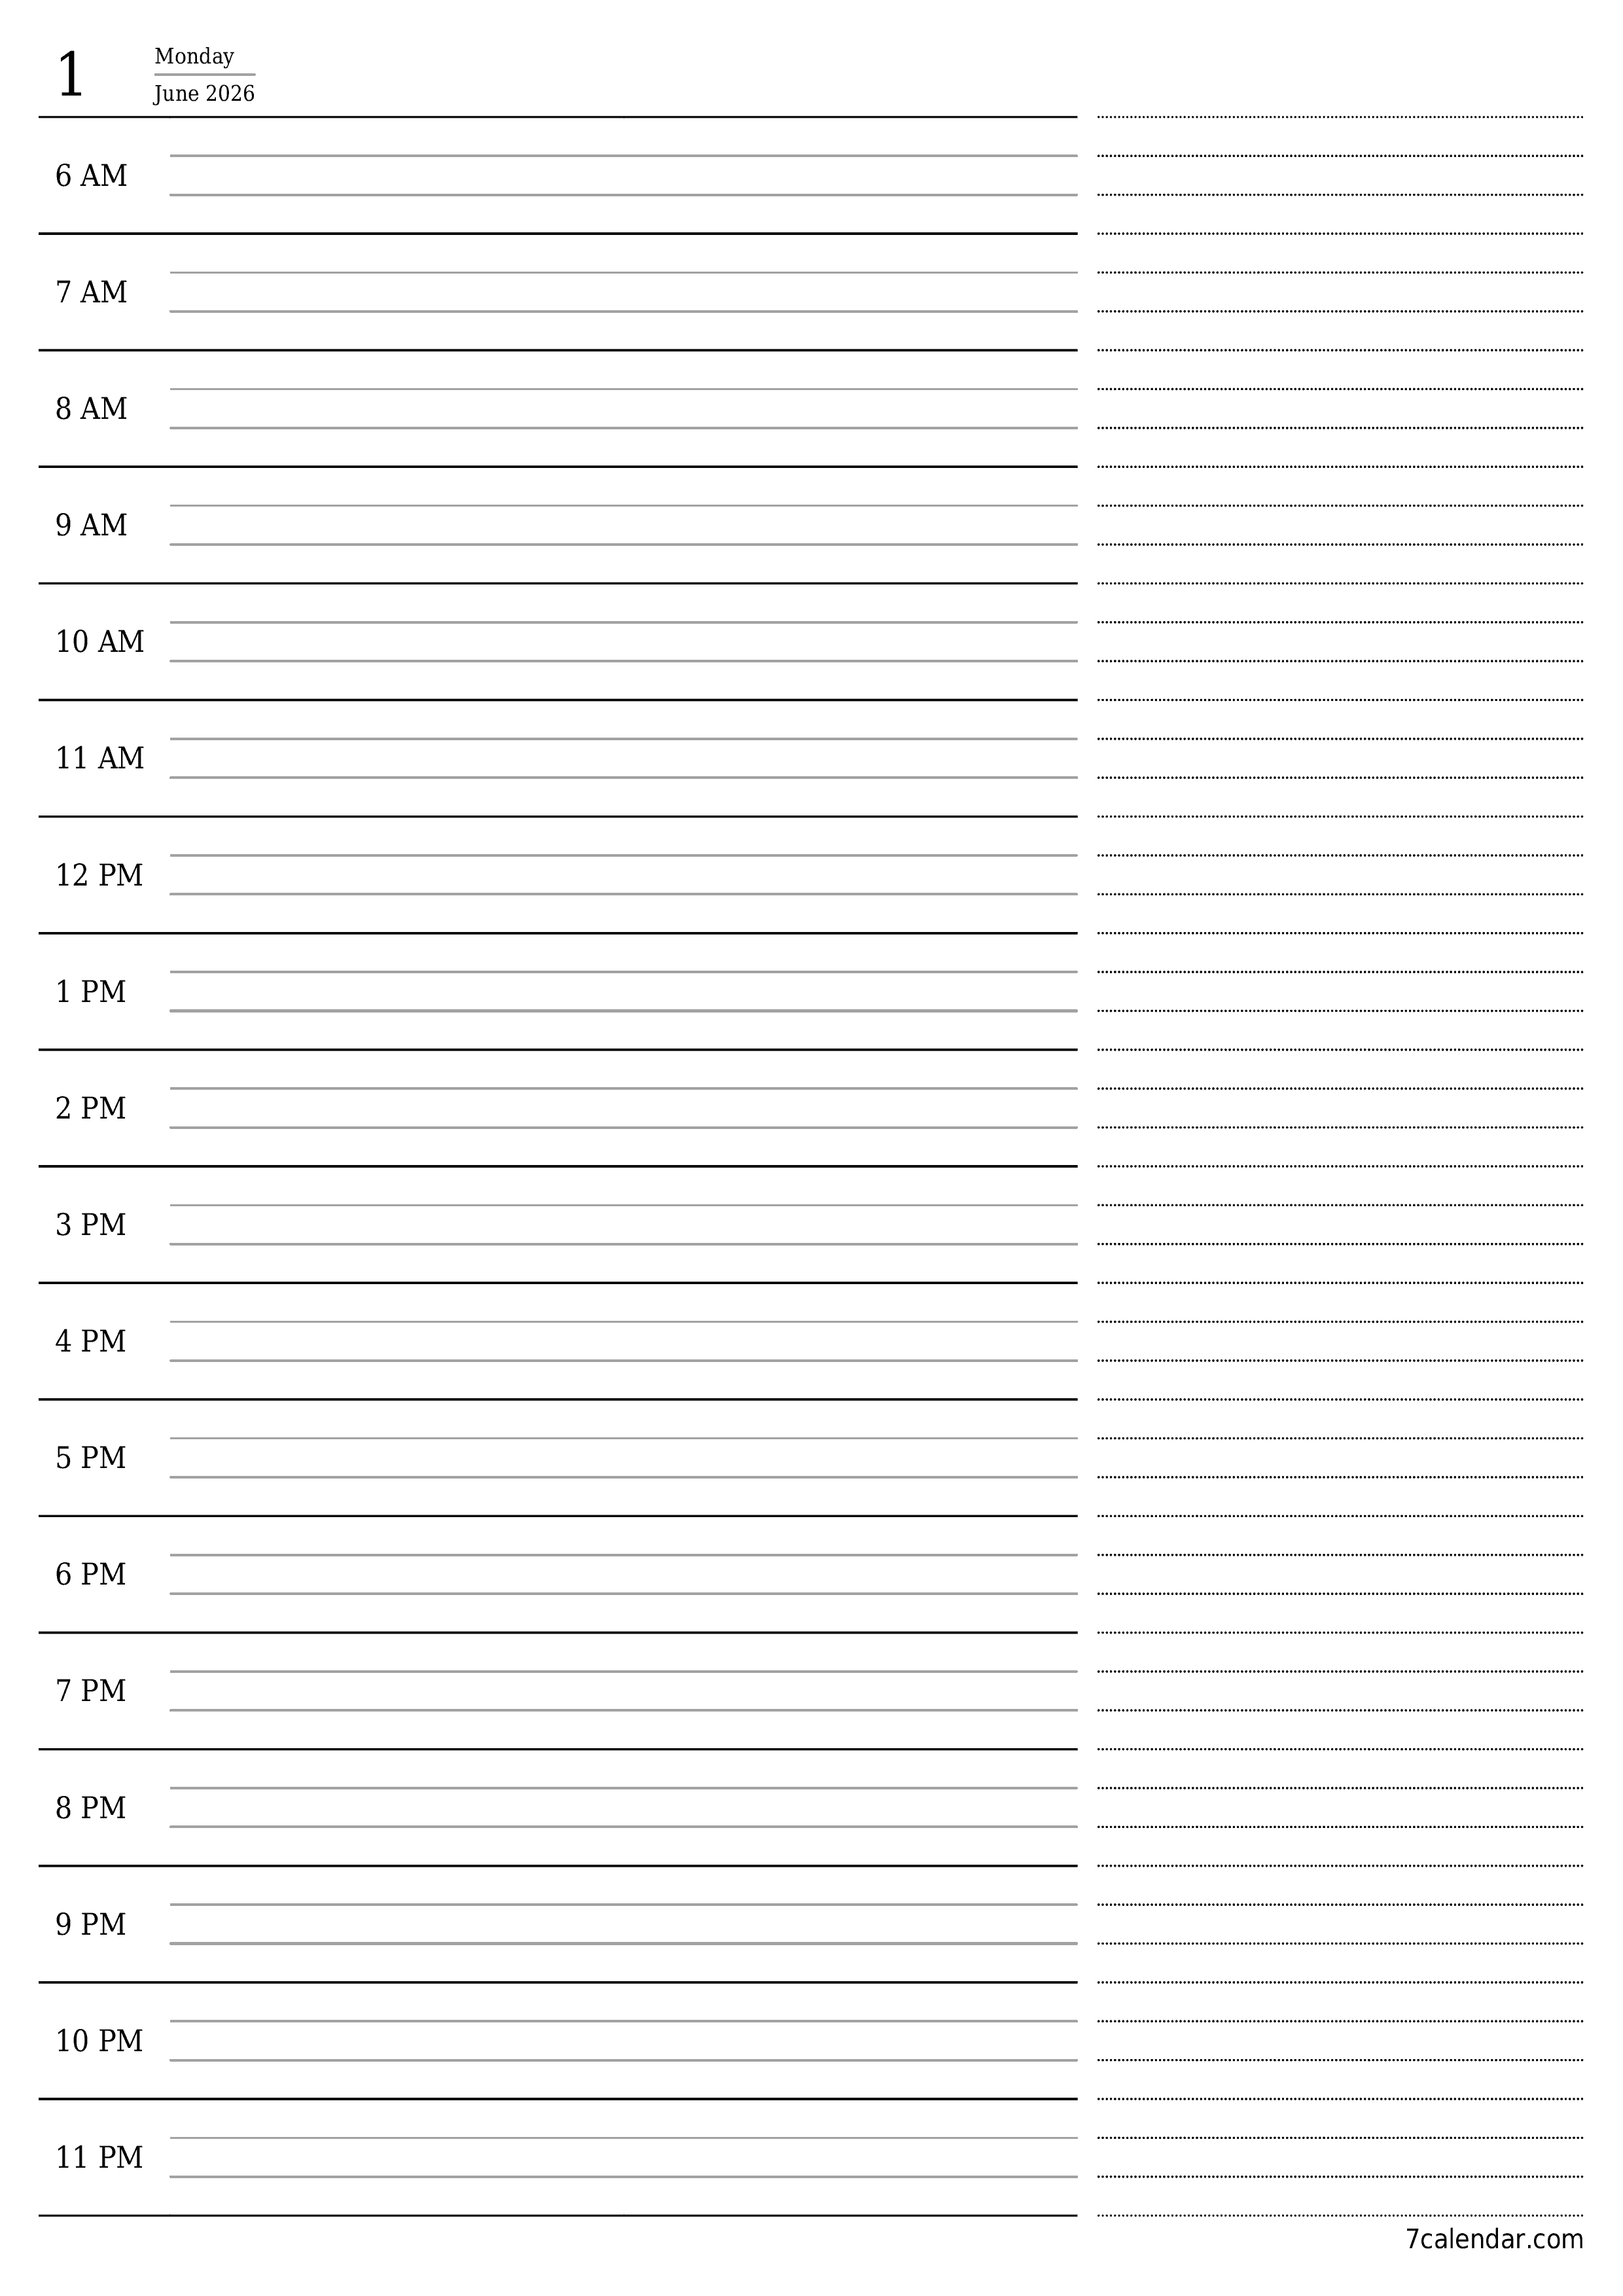 Blank daily printable calendar and planner for day June 2026 with notes, save and print to PDF PNG English